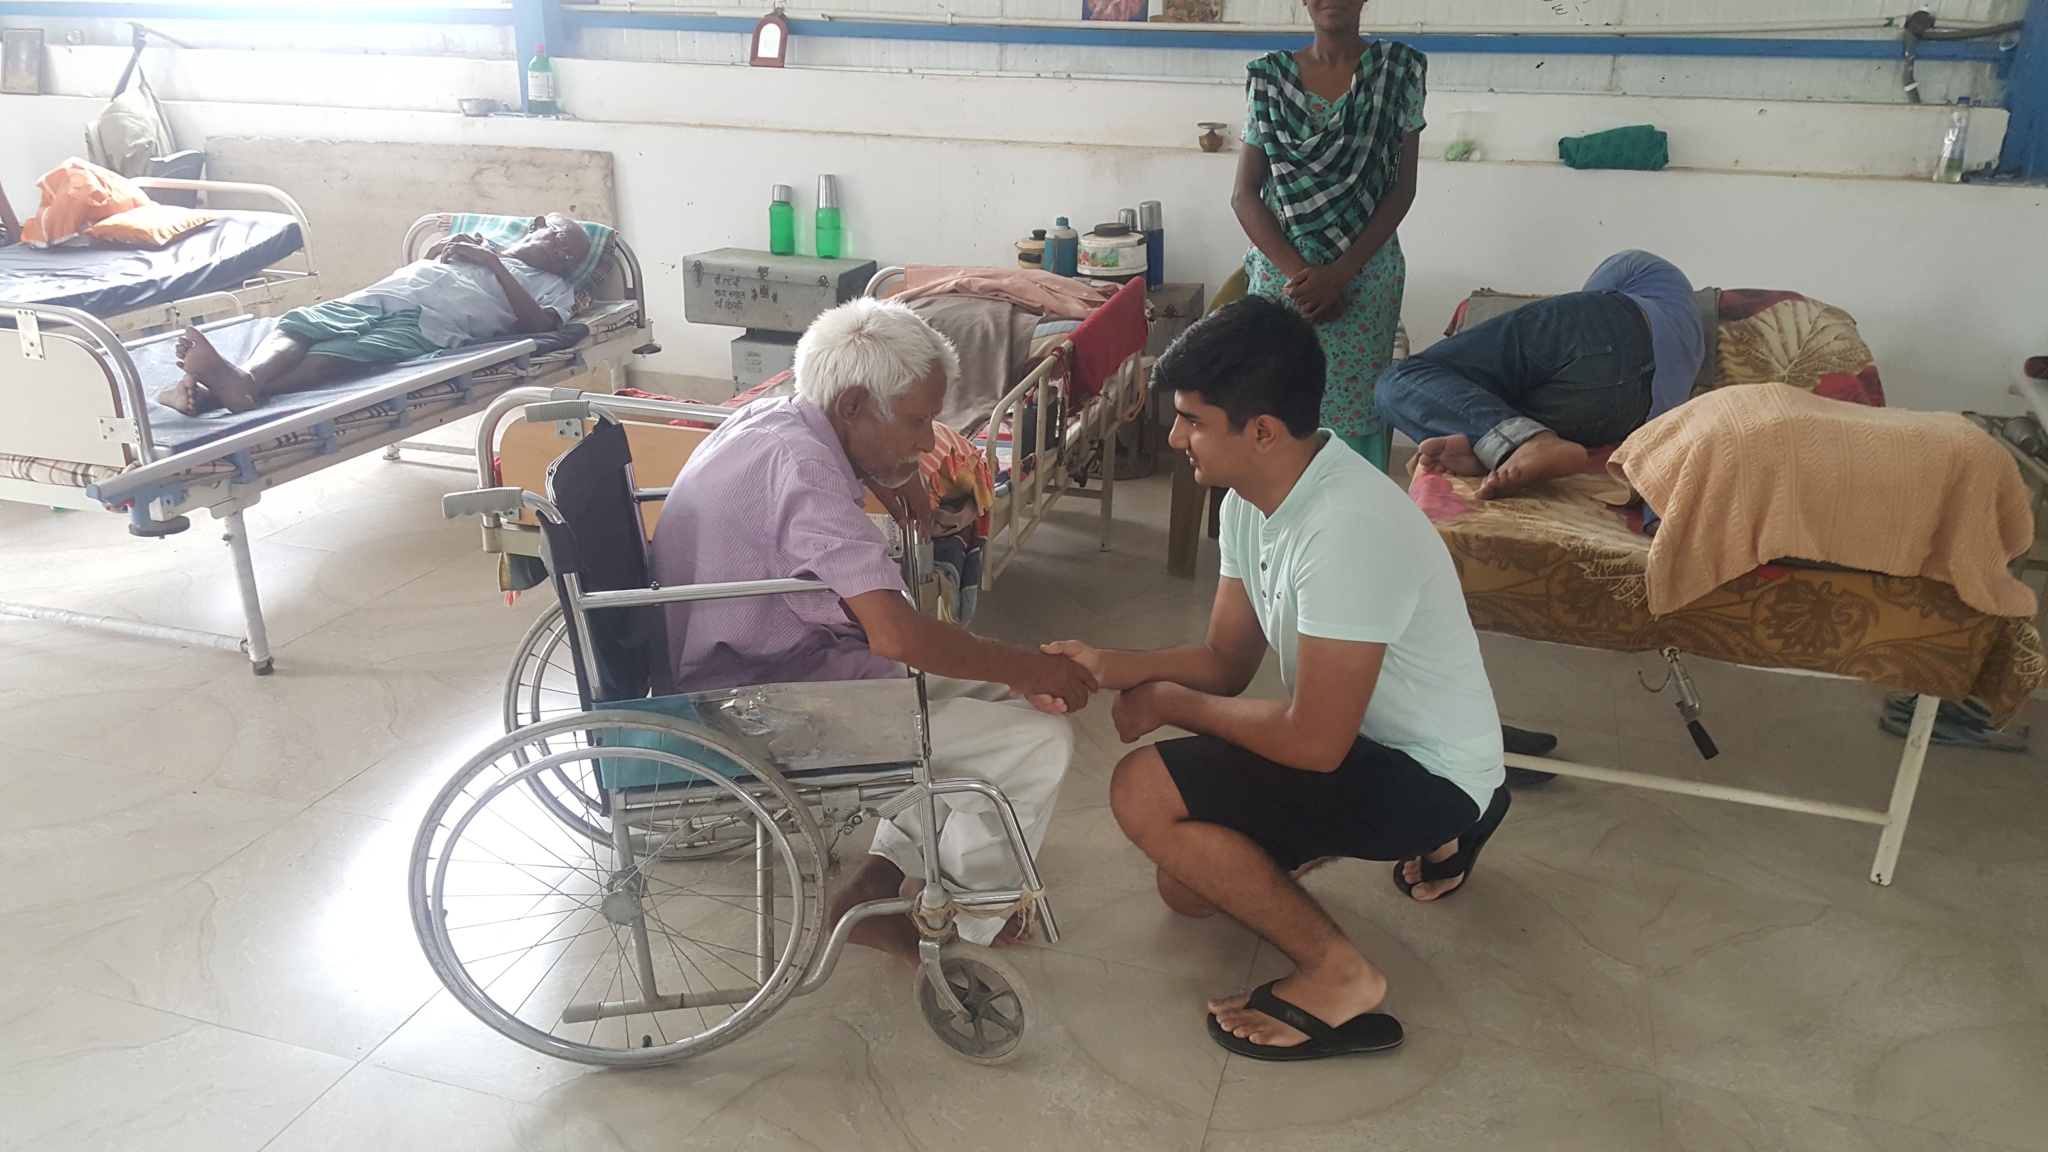 Vedaant Aggarwal with an elderly man during his stint at Earth Saviours Foundation (Source: Vedaant Aggarwal)